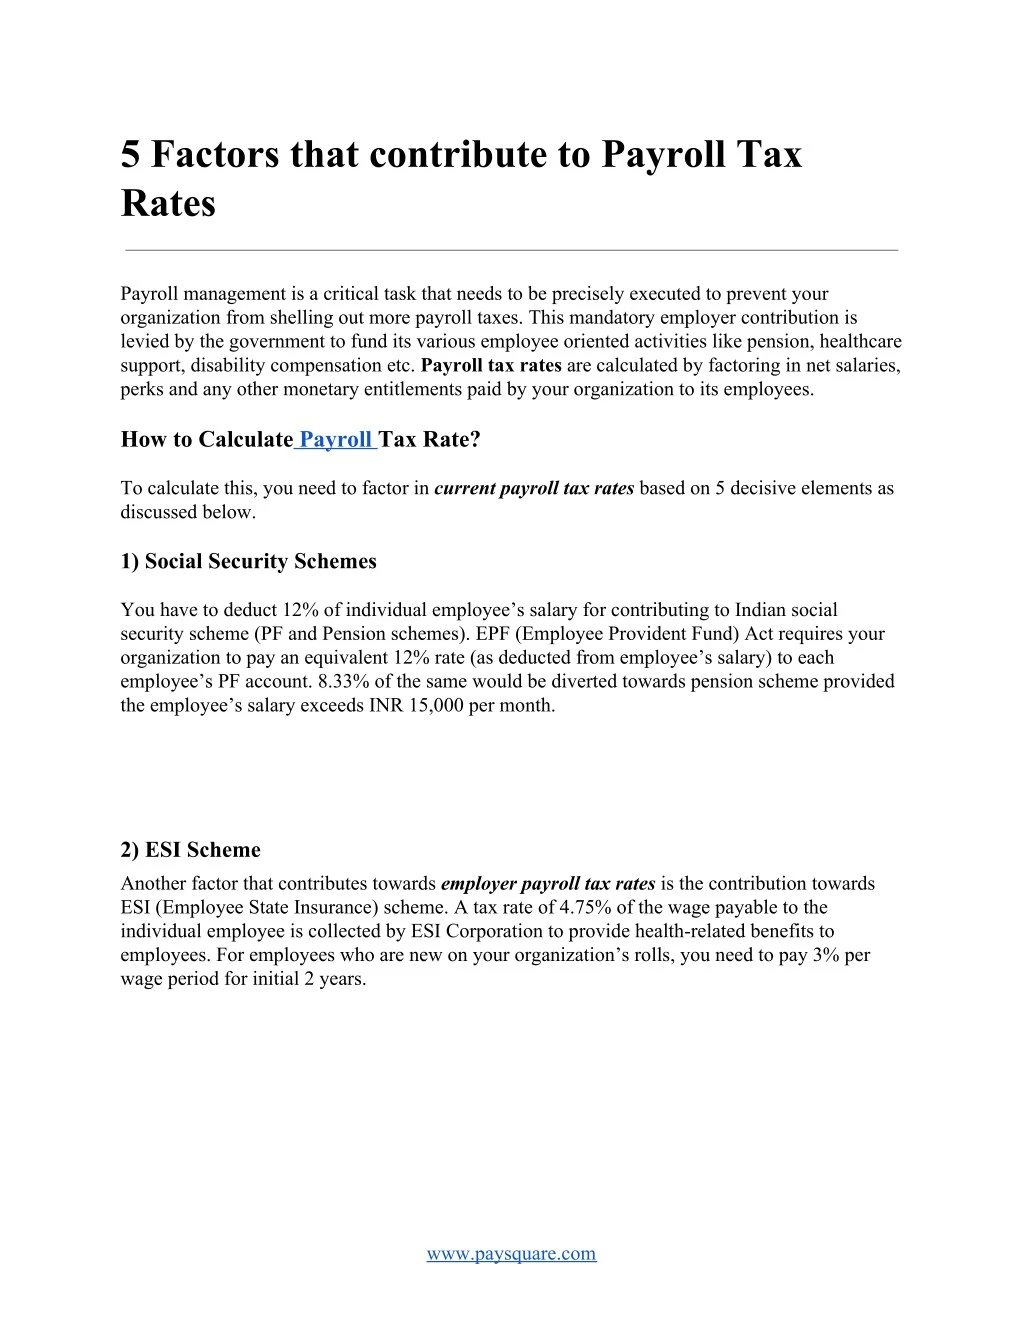 5 factors that contribute to payroll tax rates